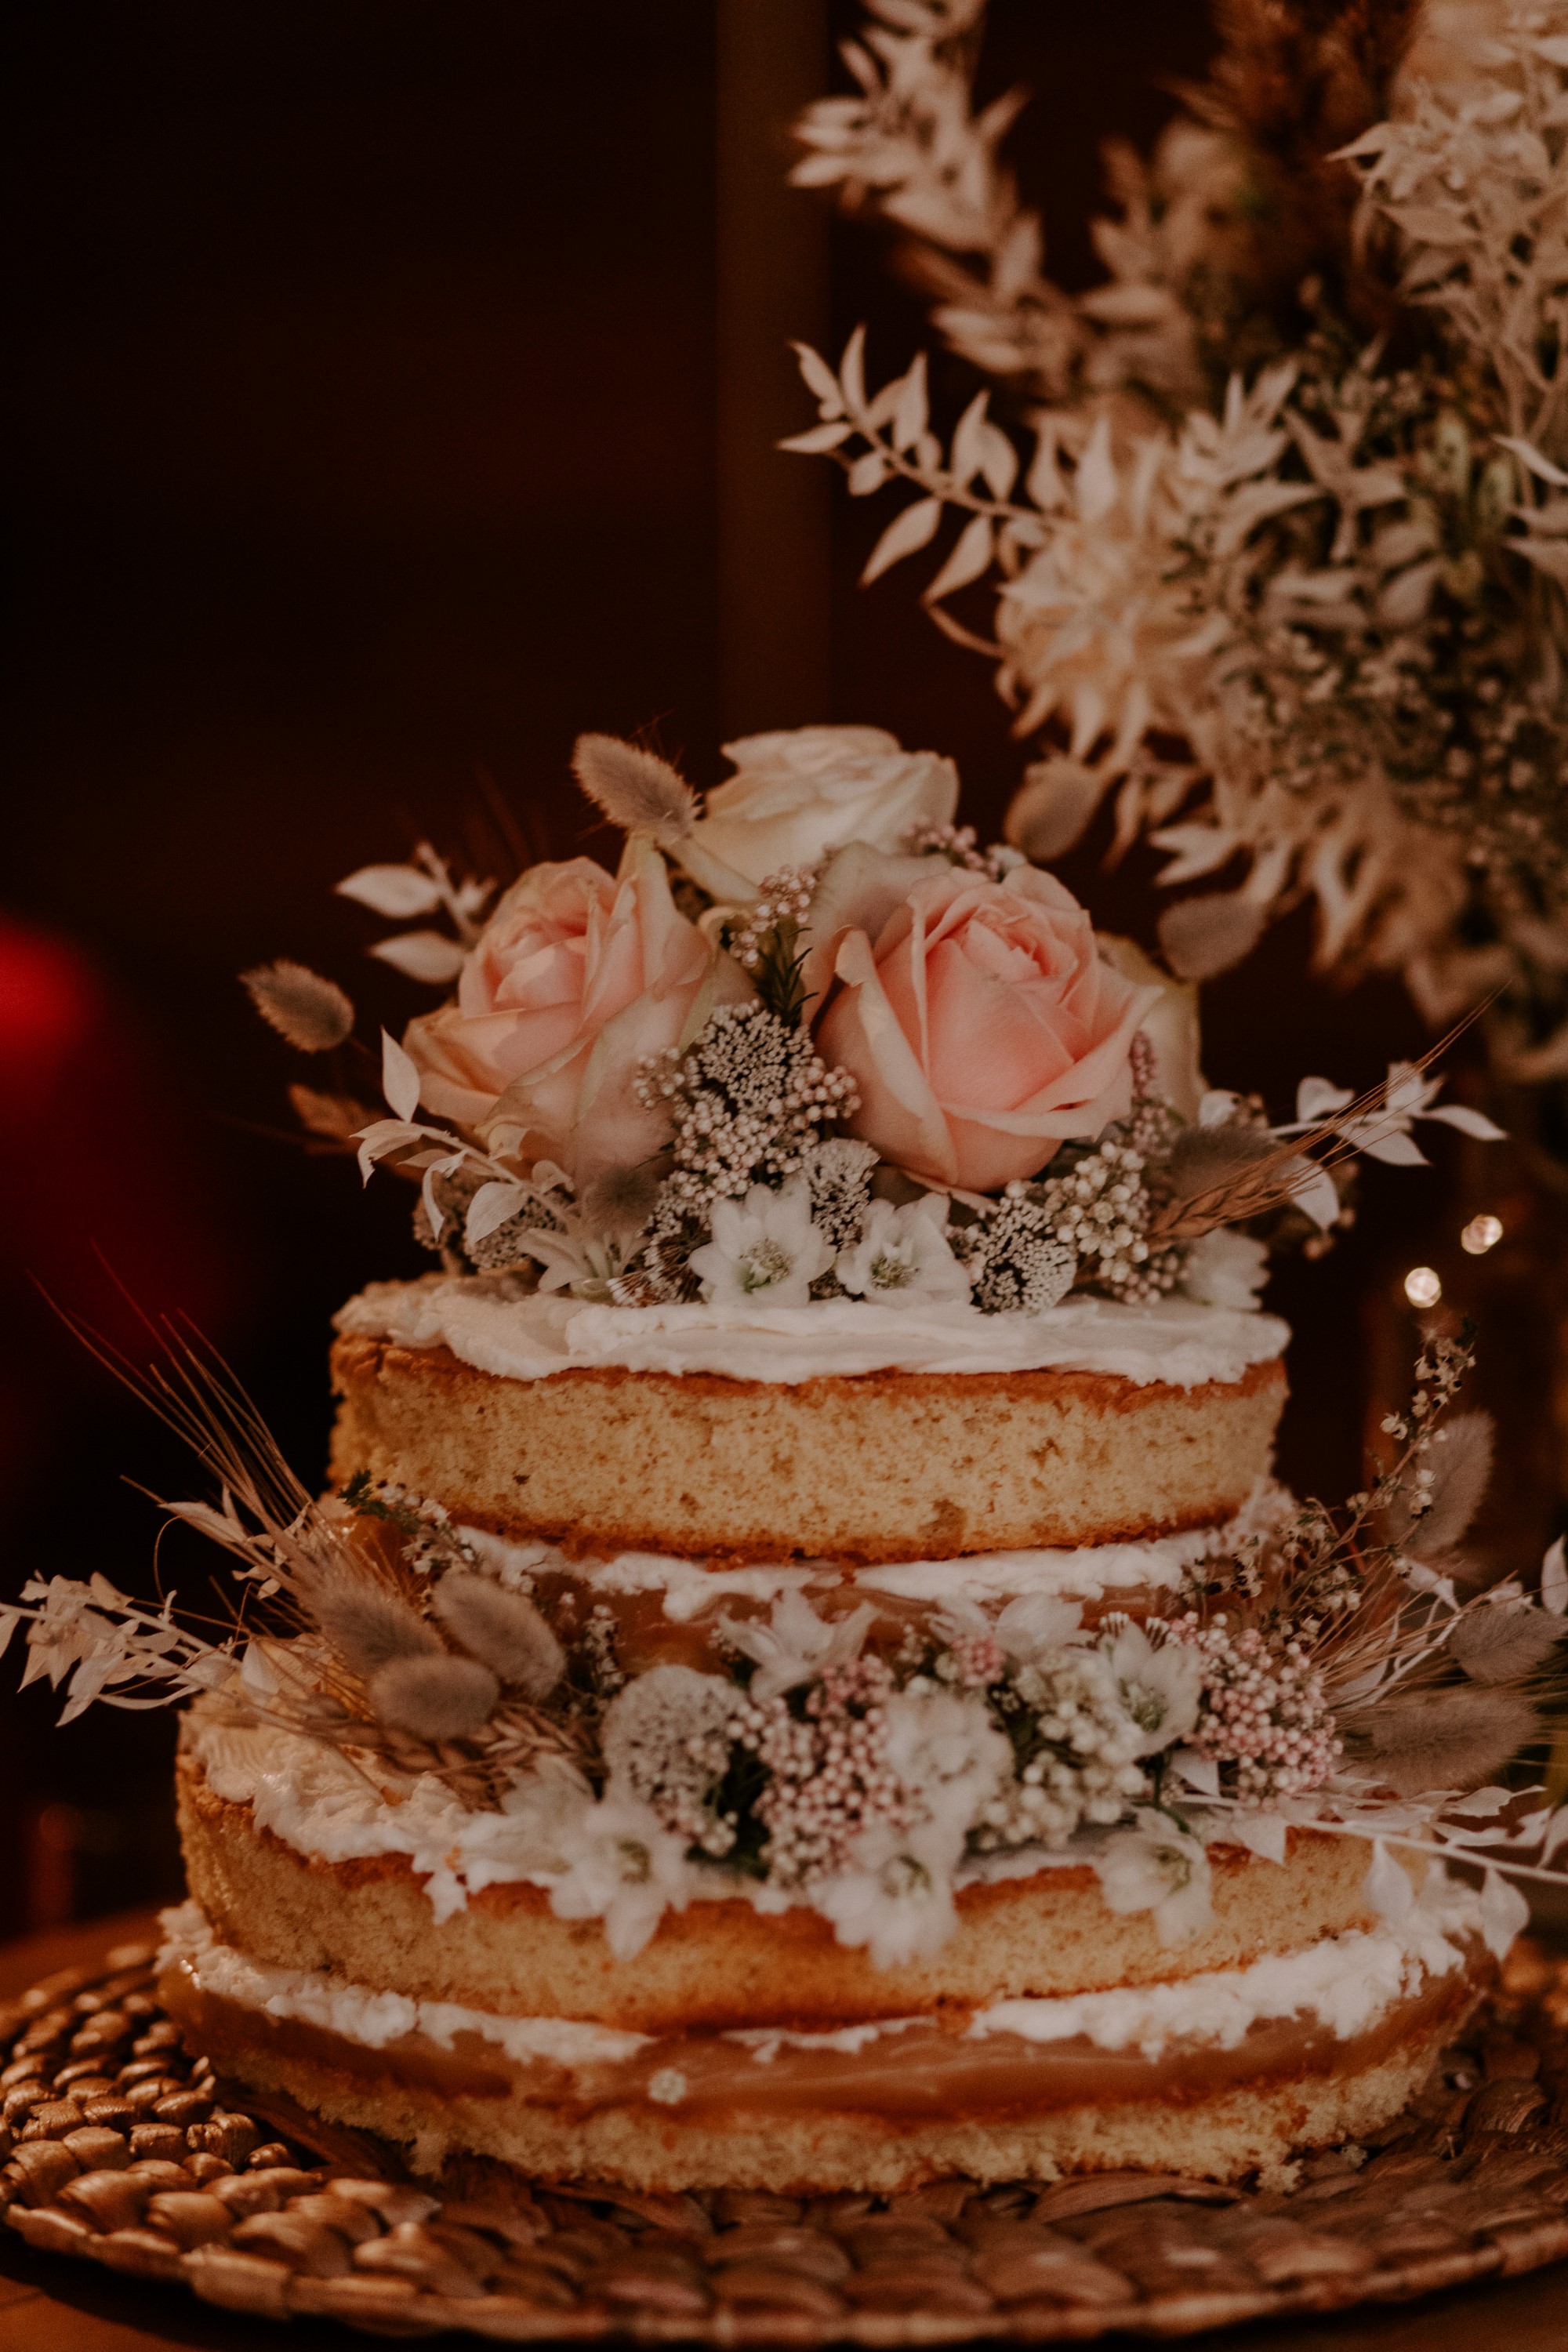 Two tiered wedding cake with flower decorations